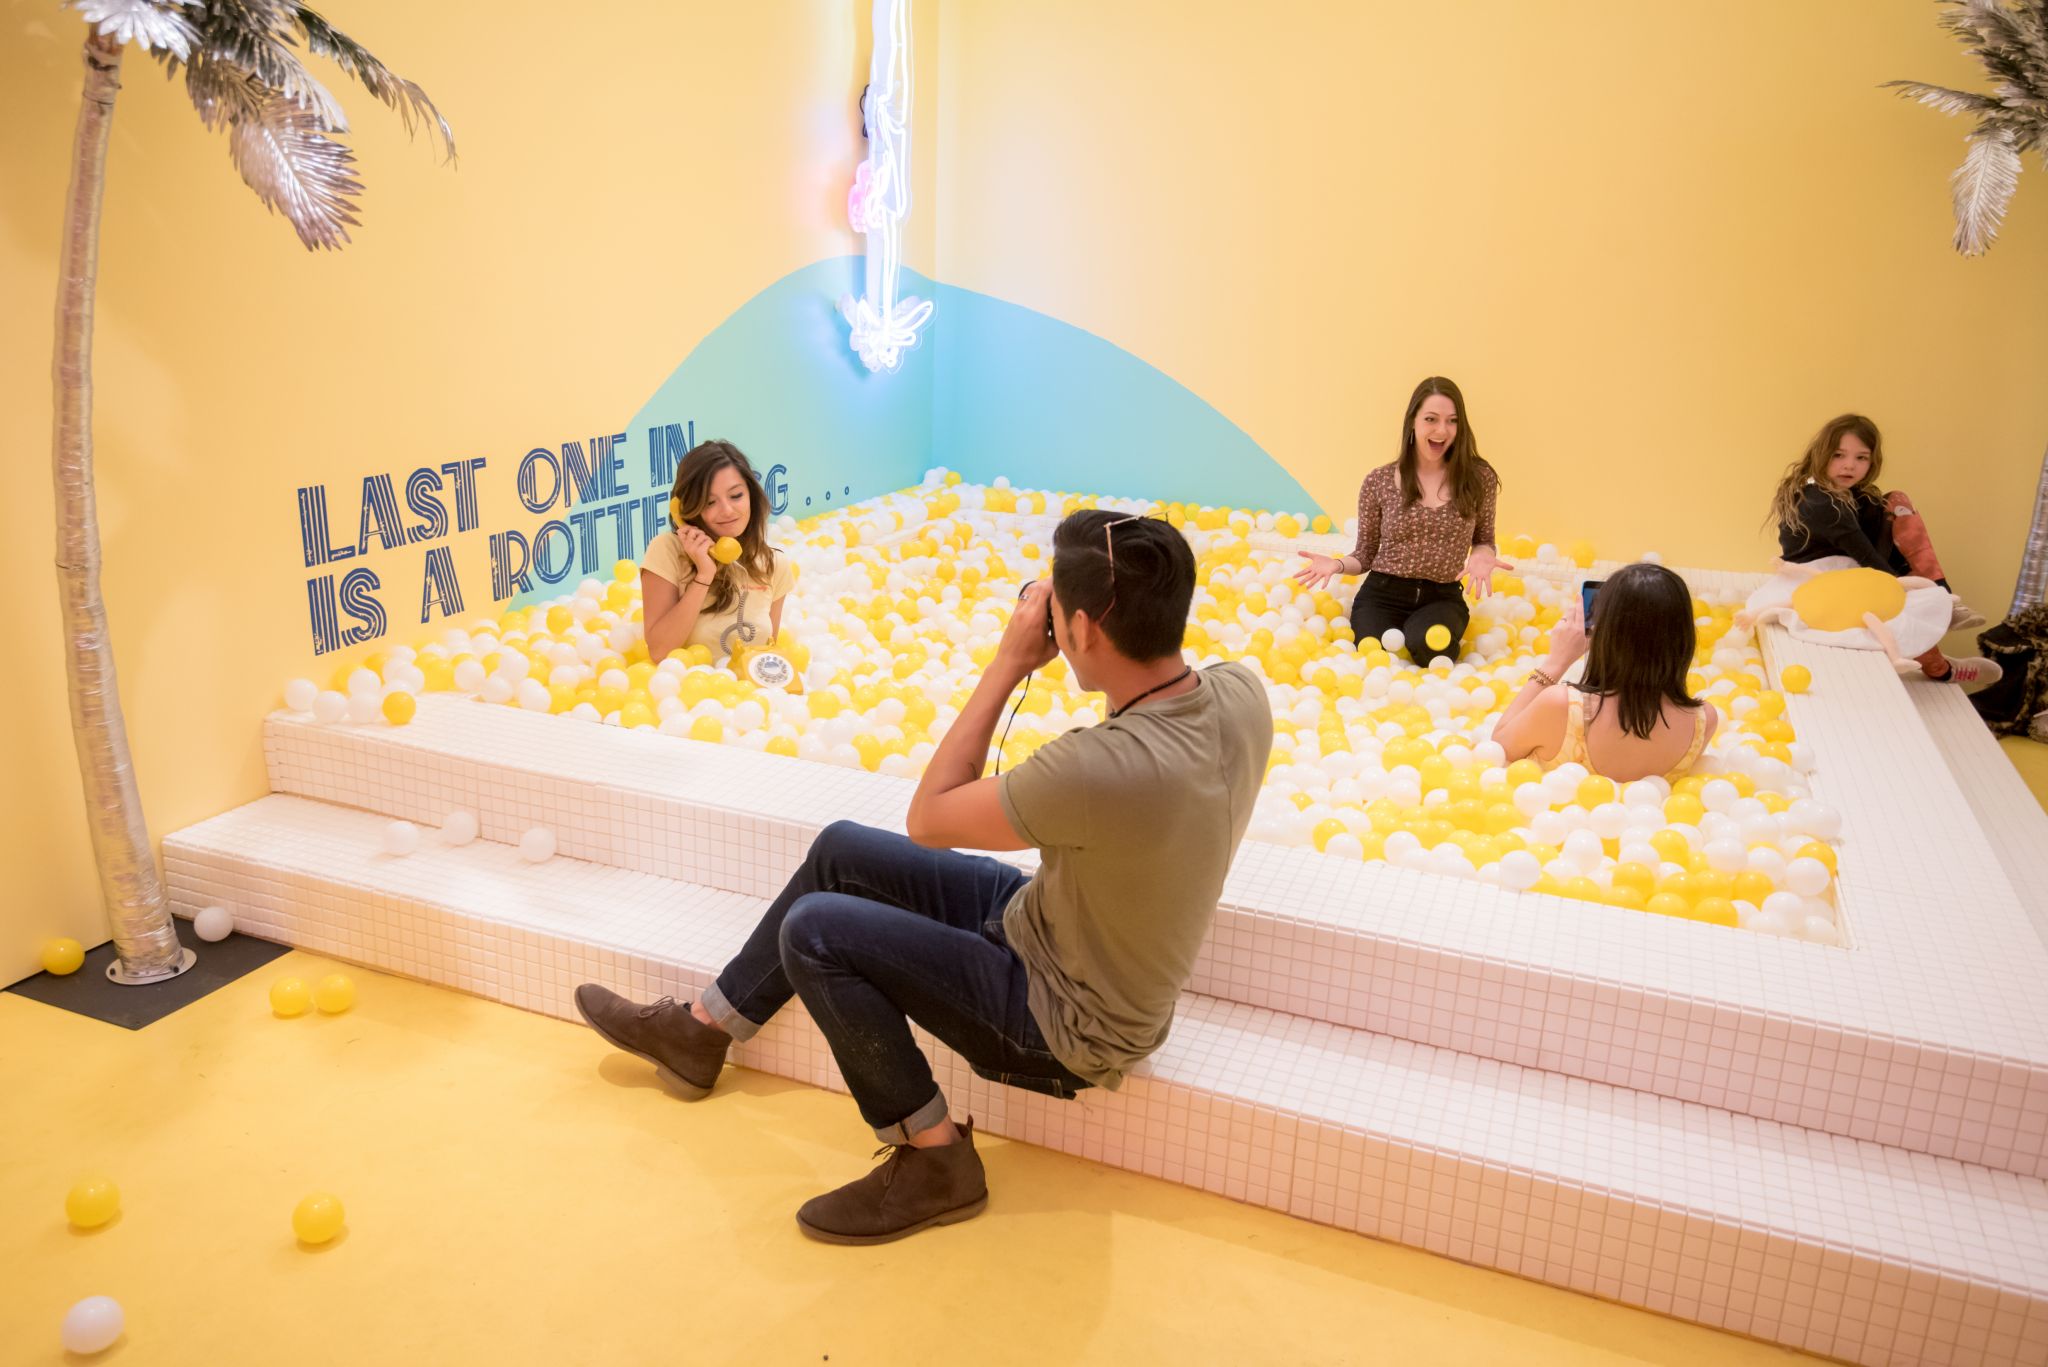 An egg-themed pop-up installation is coming to DTLA